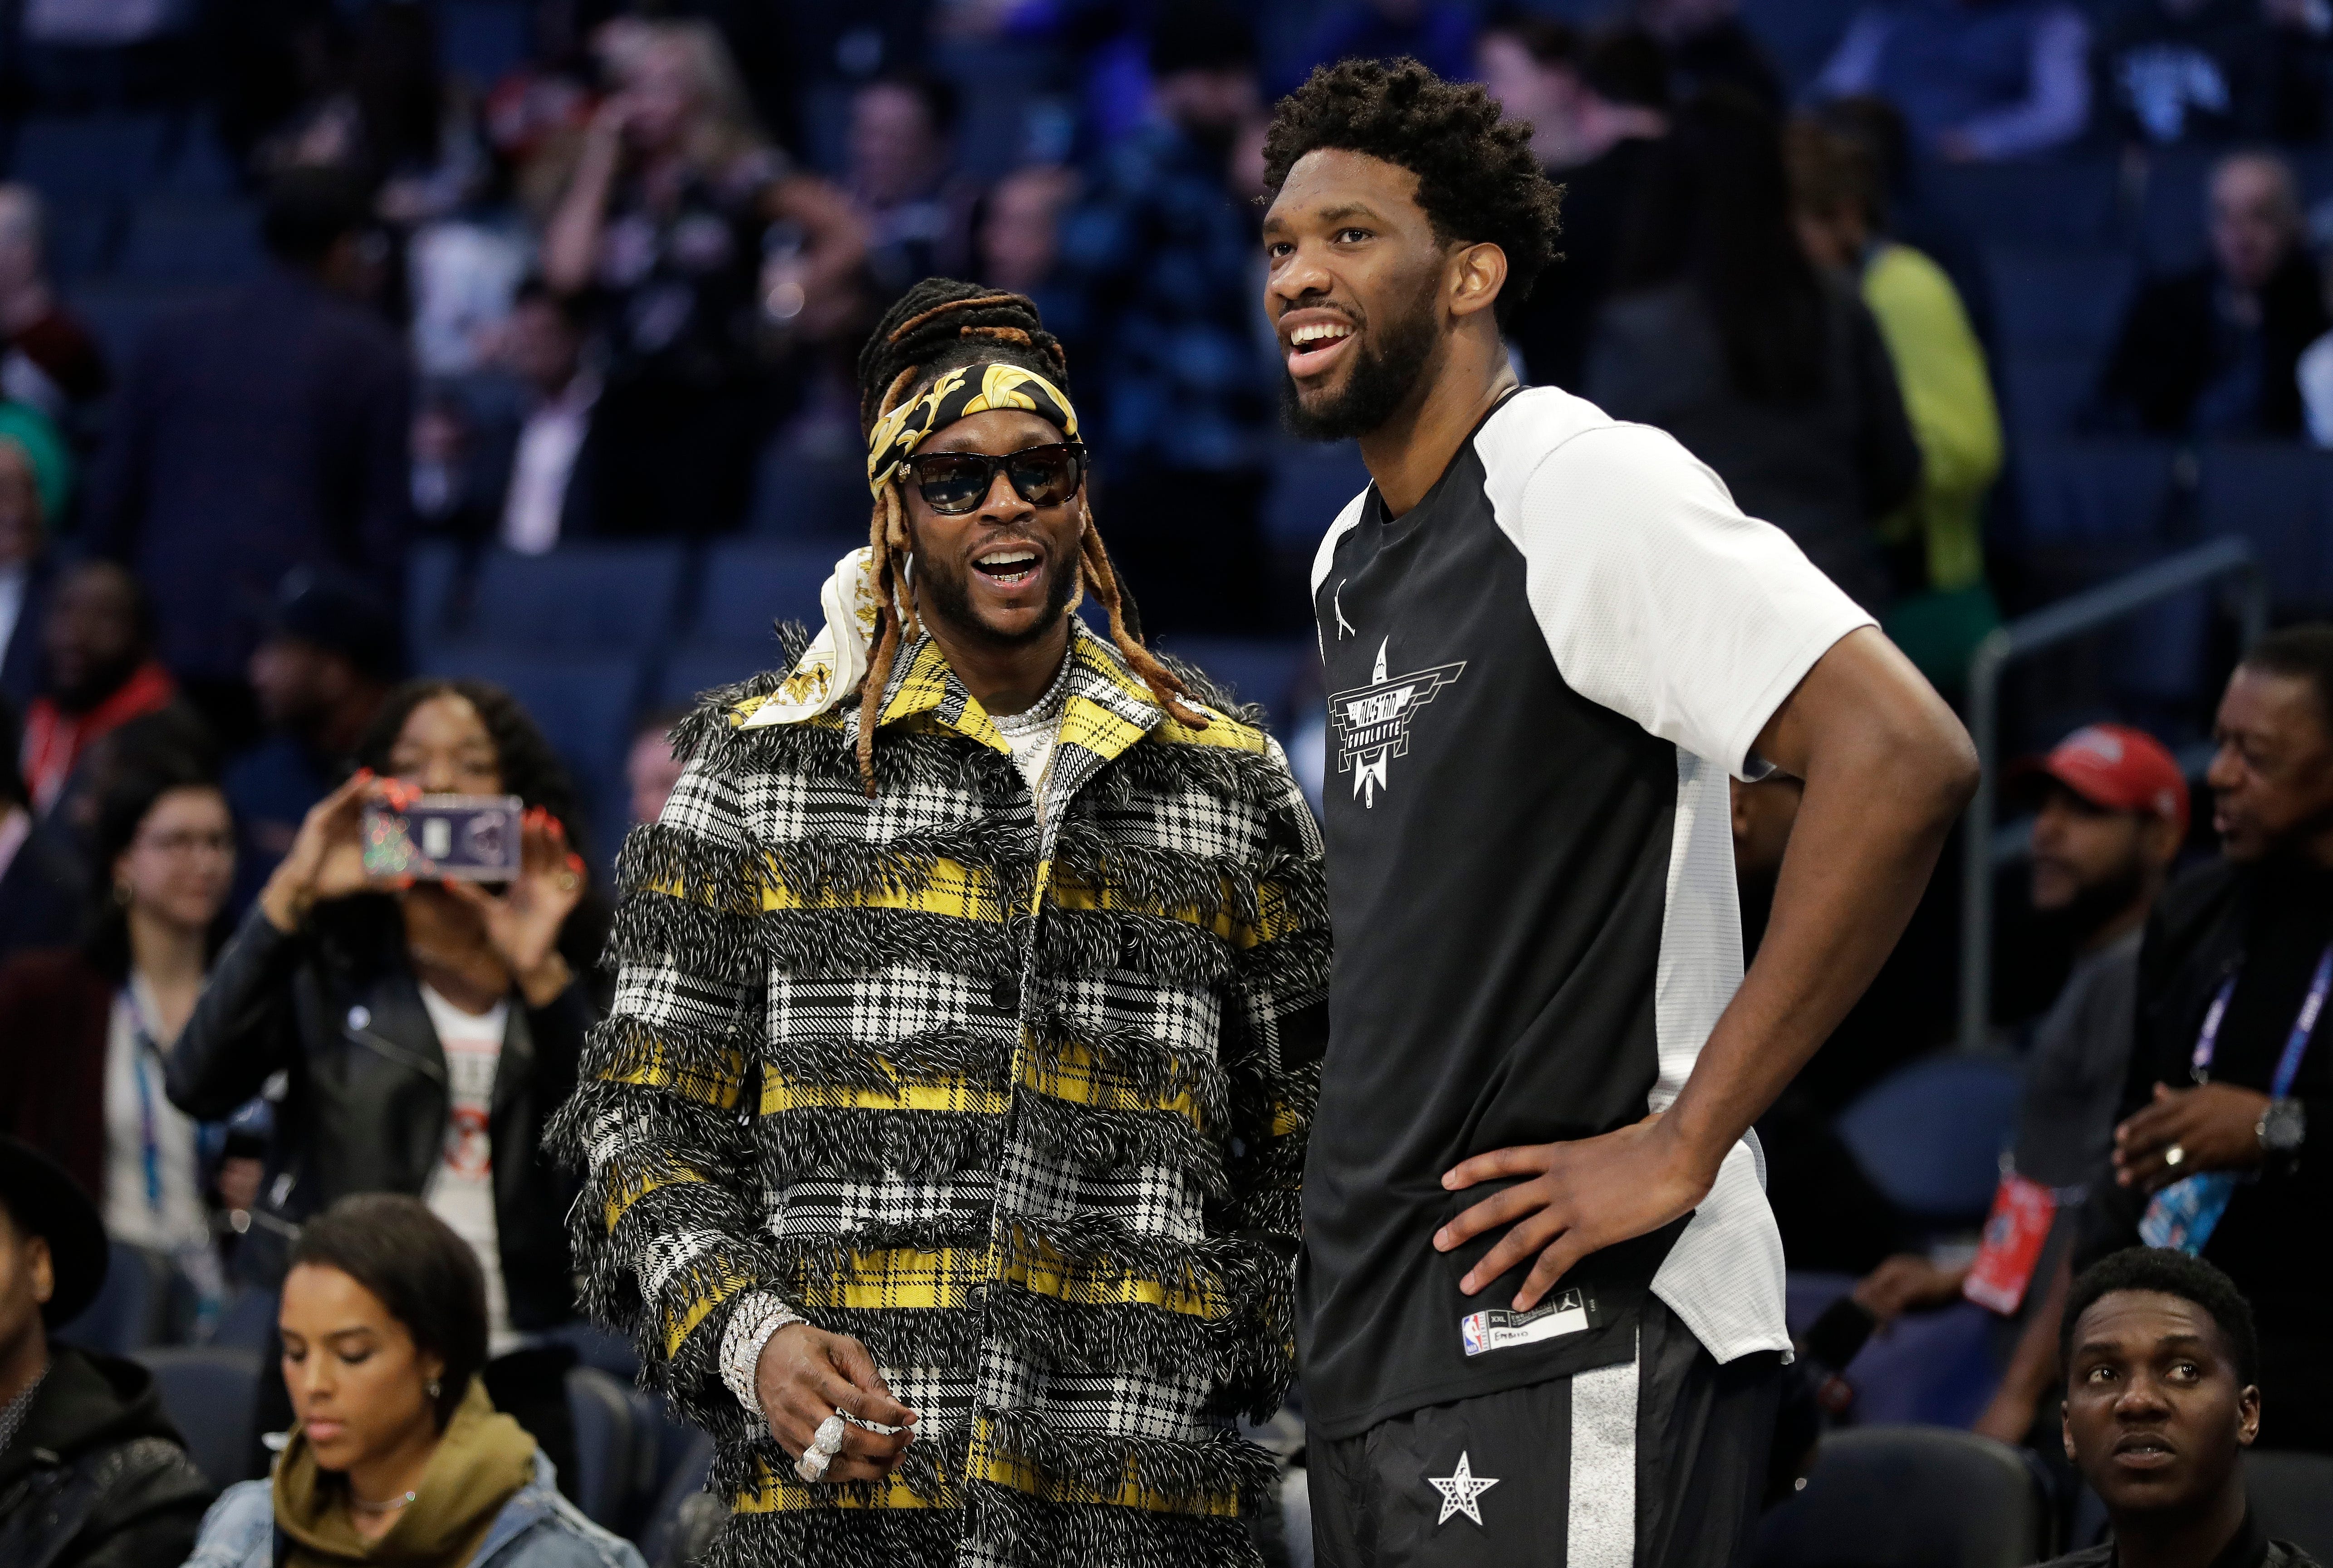 Follow along: Must-see moments from 2019 NBA All-Star Game